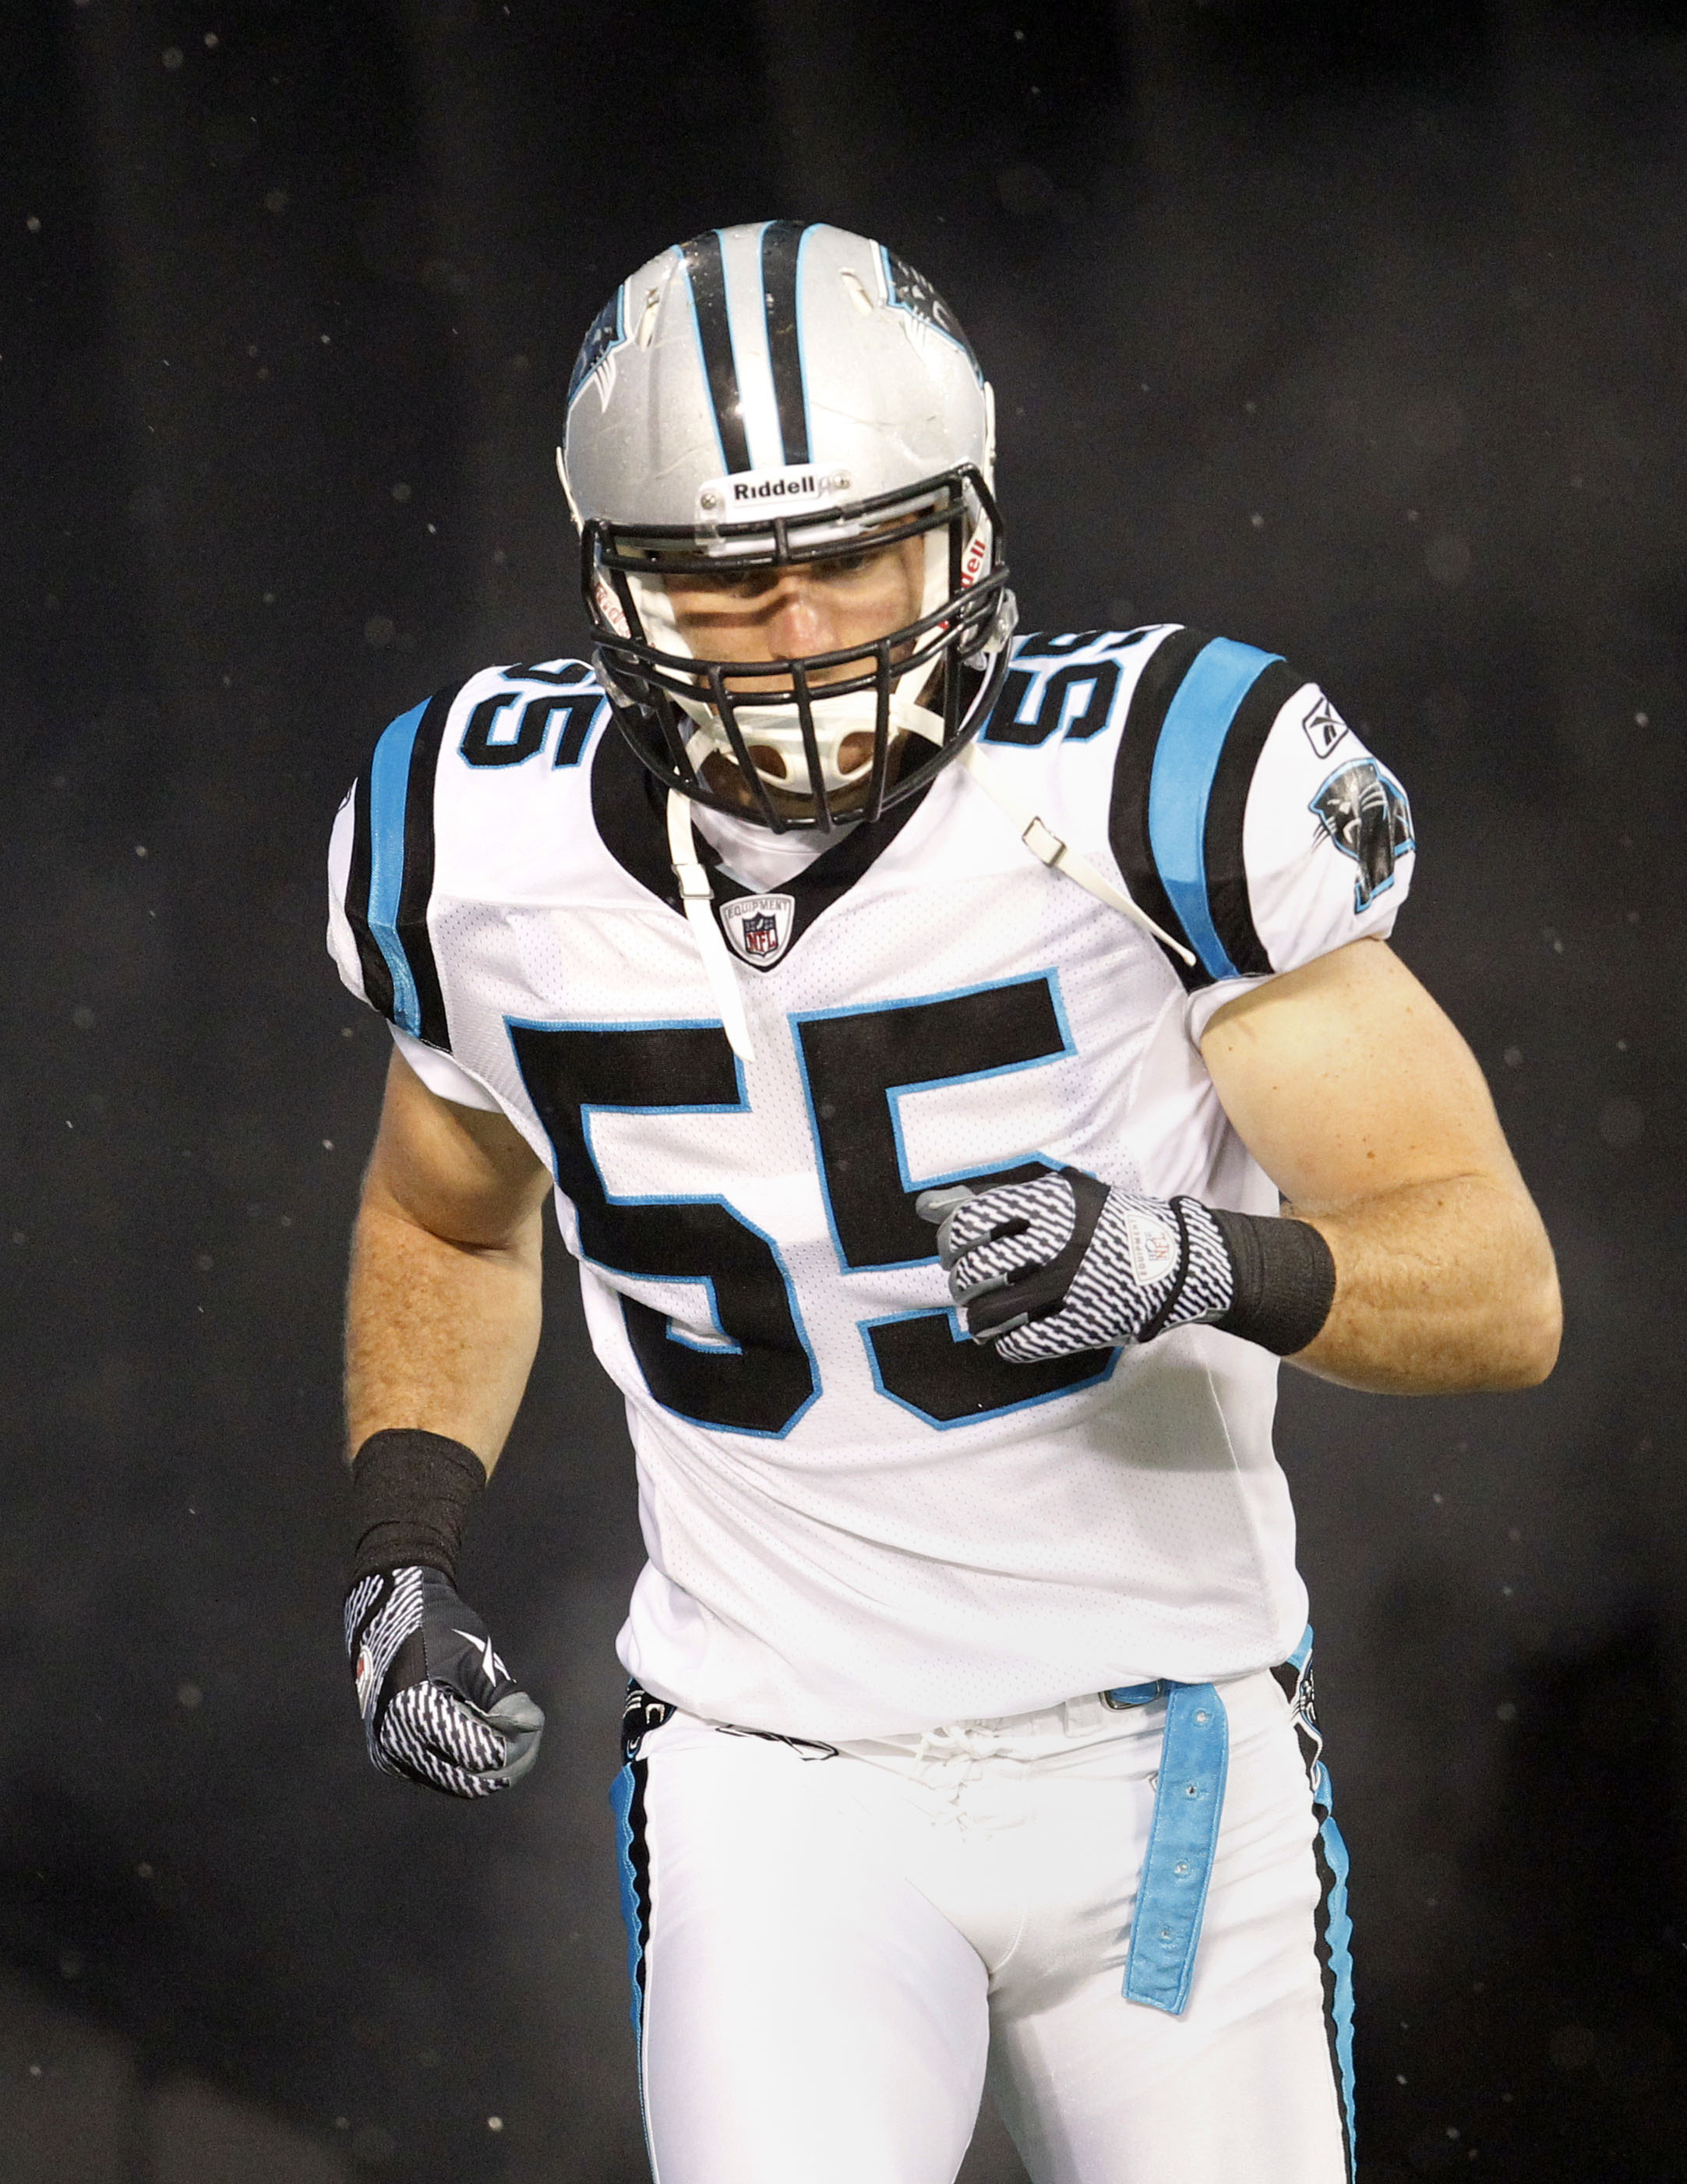 Dan Connor spent six seasons in the NFL. (Photo: Bob Donnan, USA TODAY Sports)